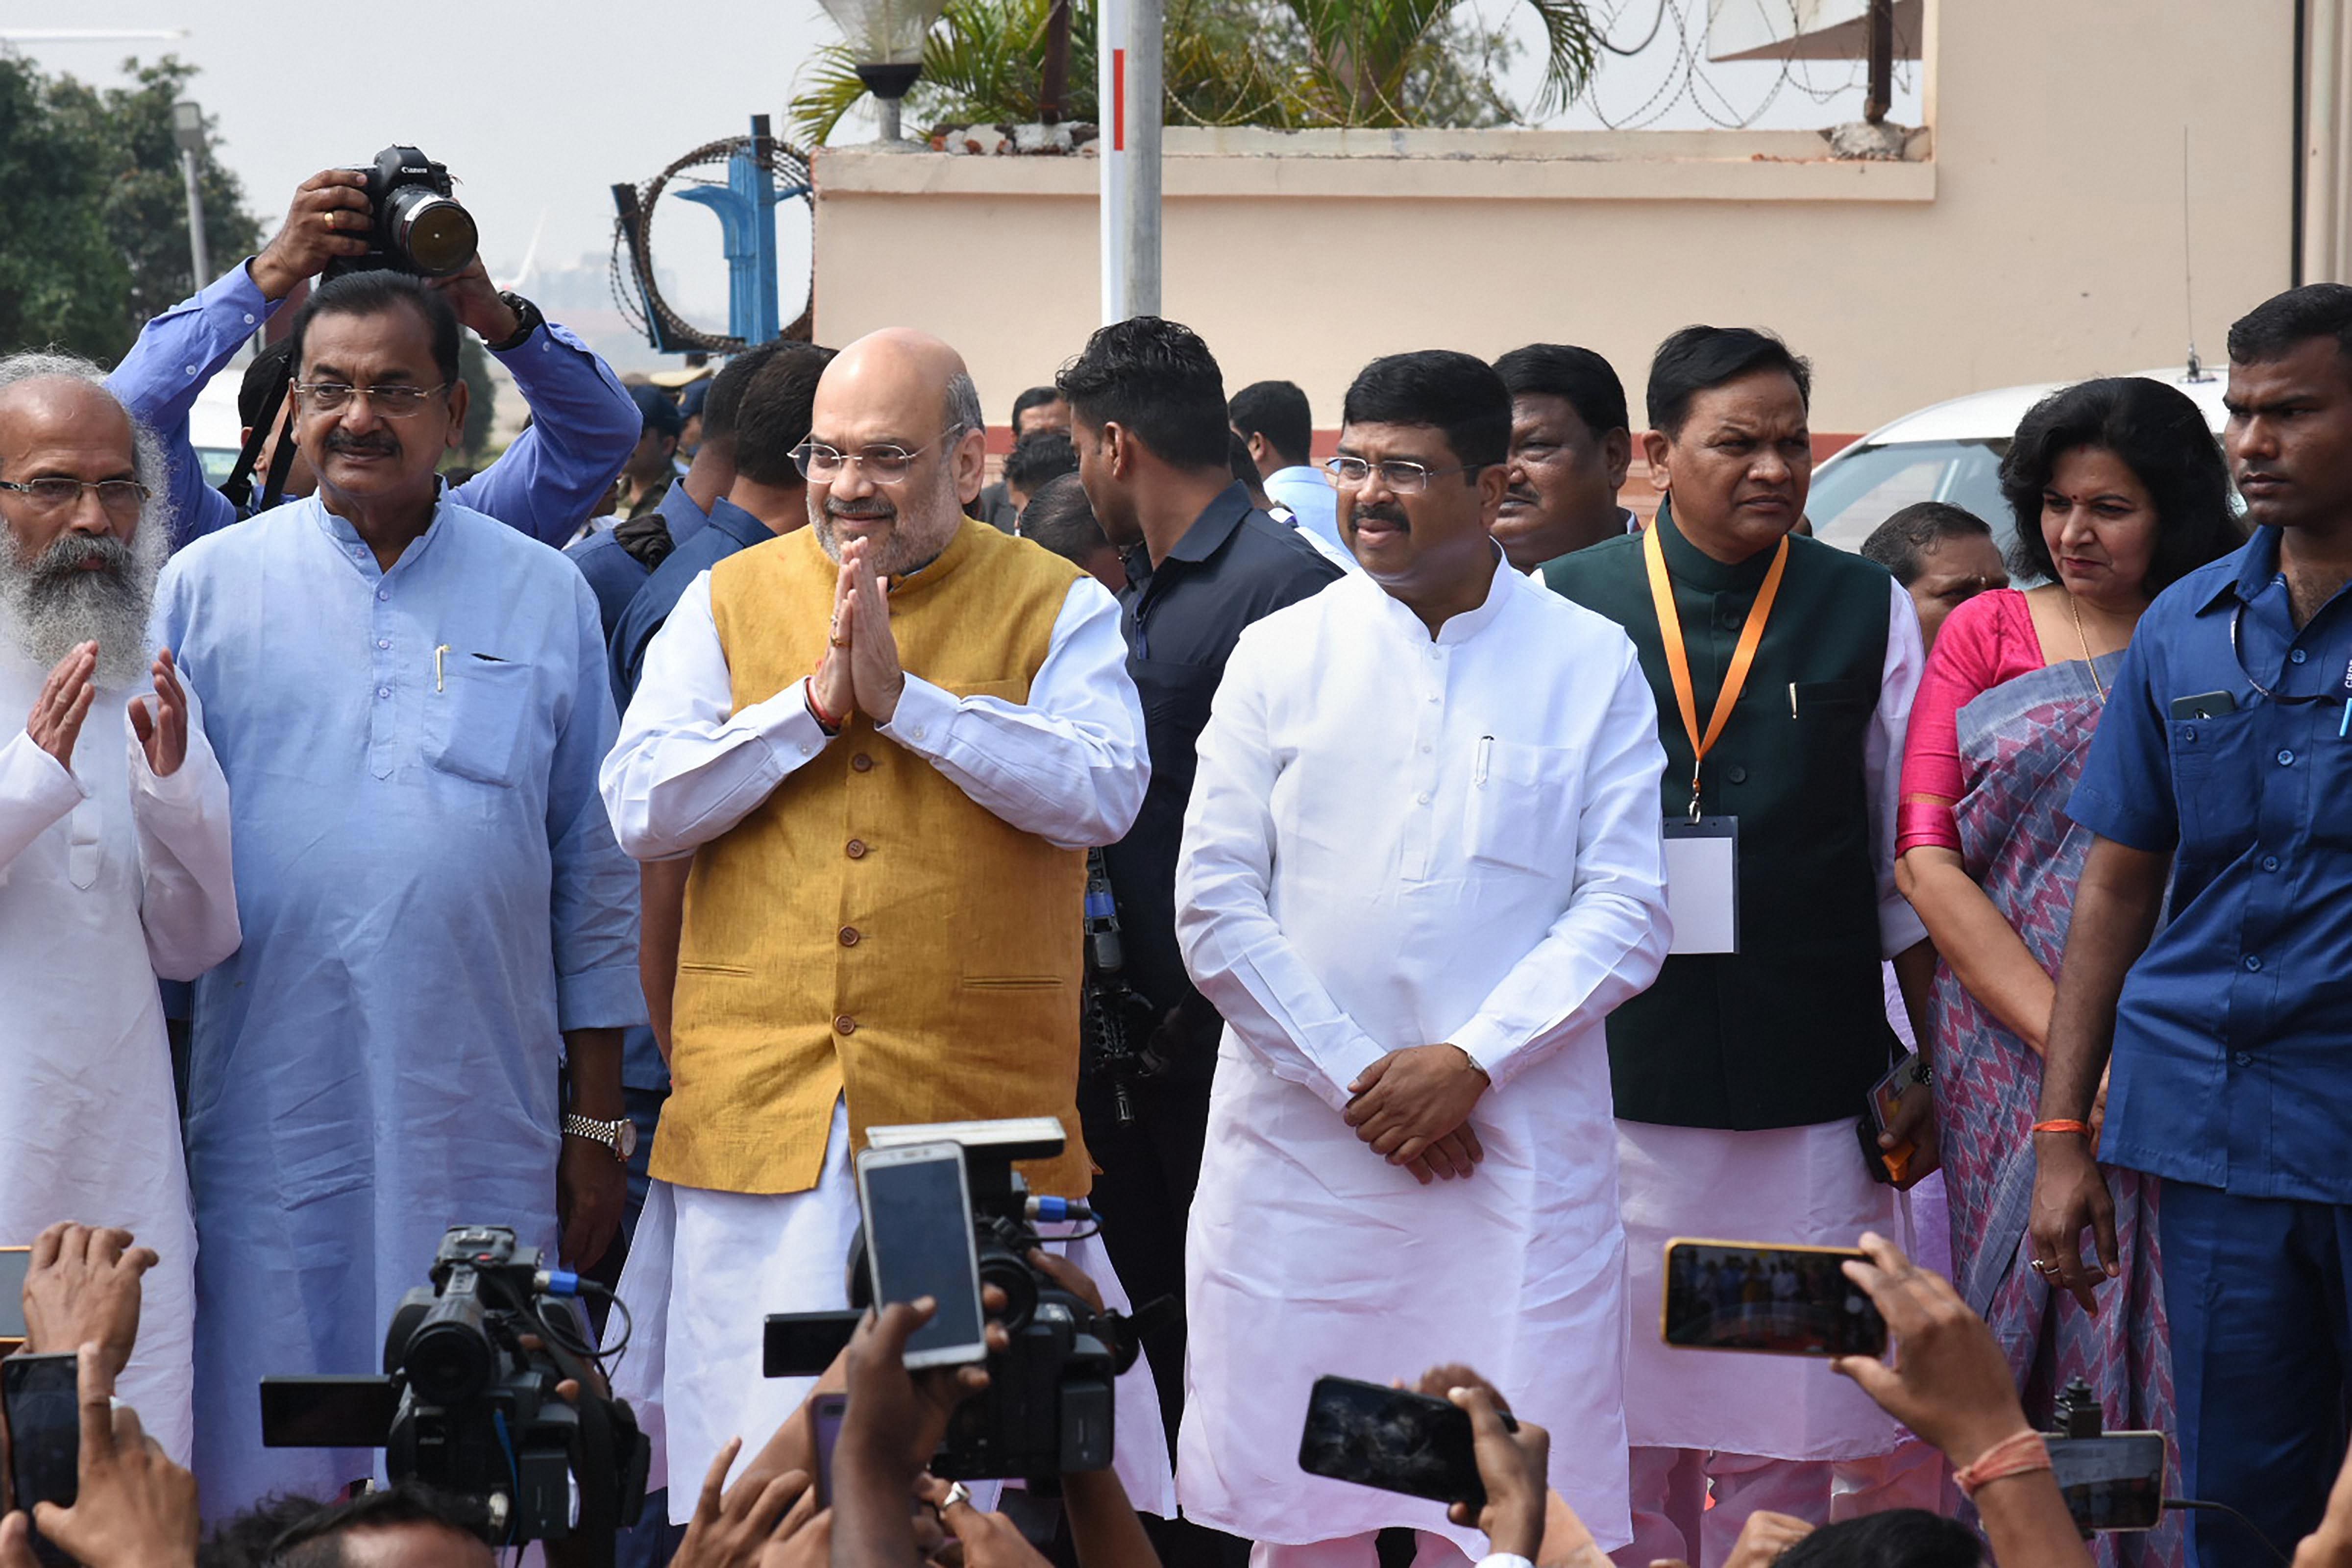 Home Minister Amit Shah is greeted by party workers at airport ahead of his of meeting of the Eastern Zonal Council (EZC) followed by a rally in support of the amended citizenship law, in Bhubaneswar. (PTI Photo)